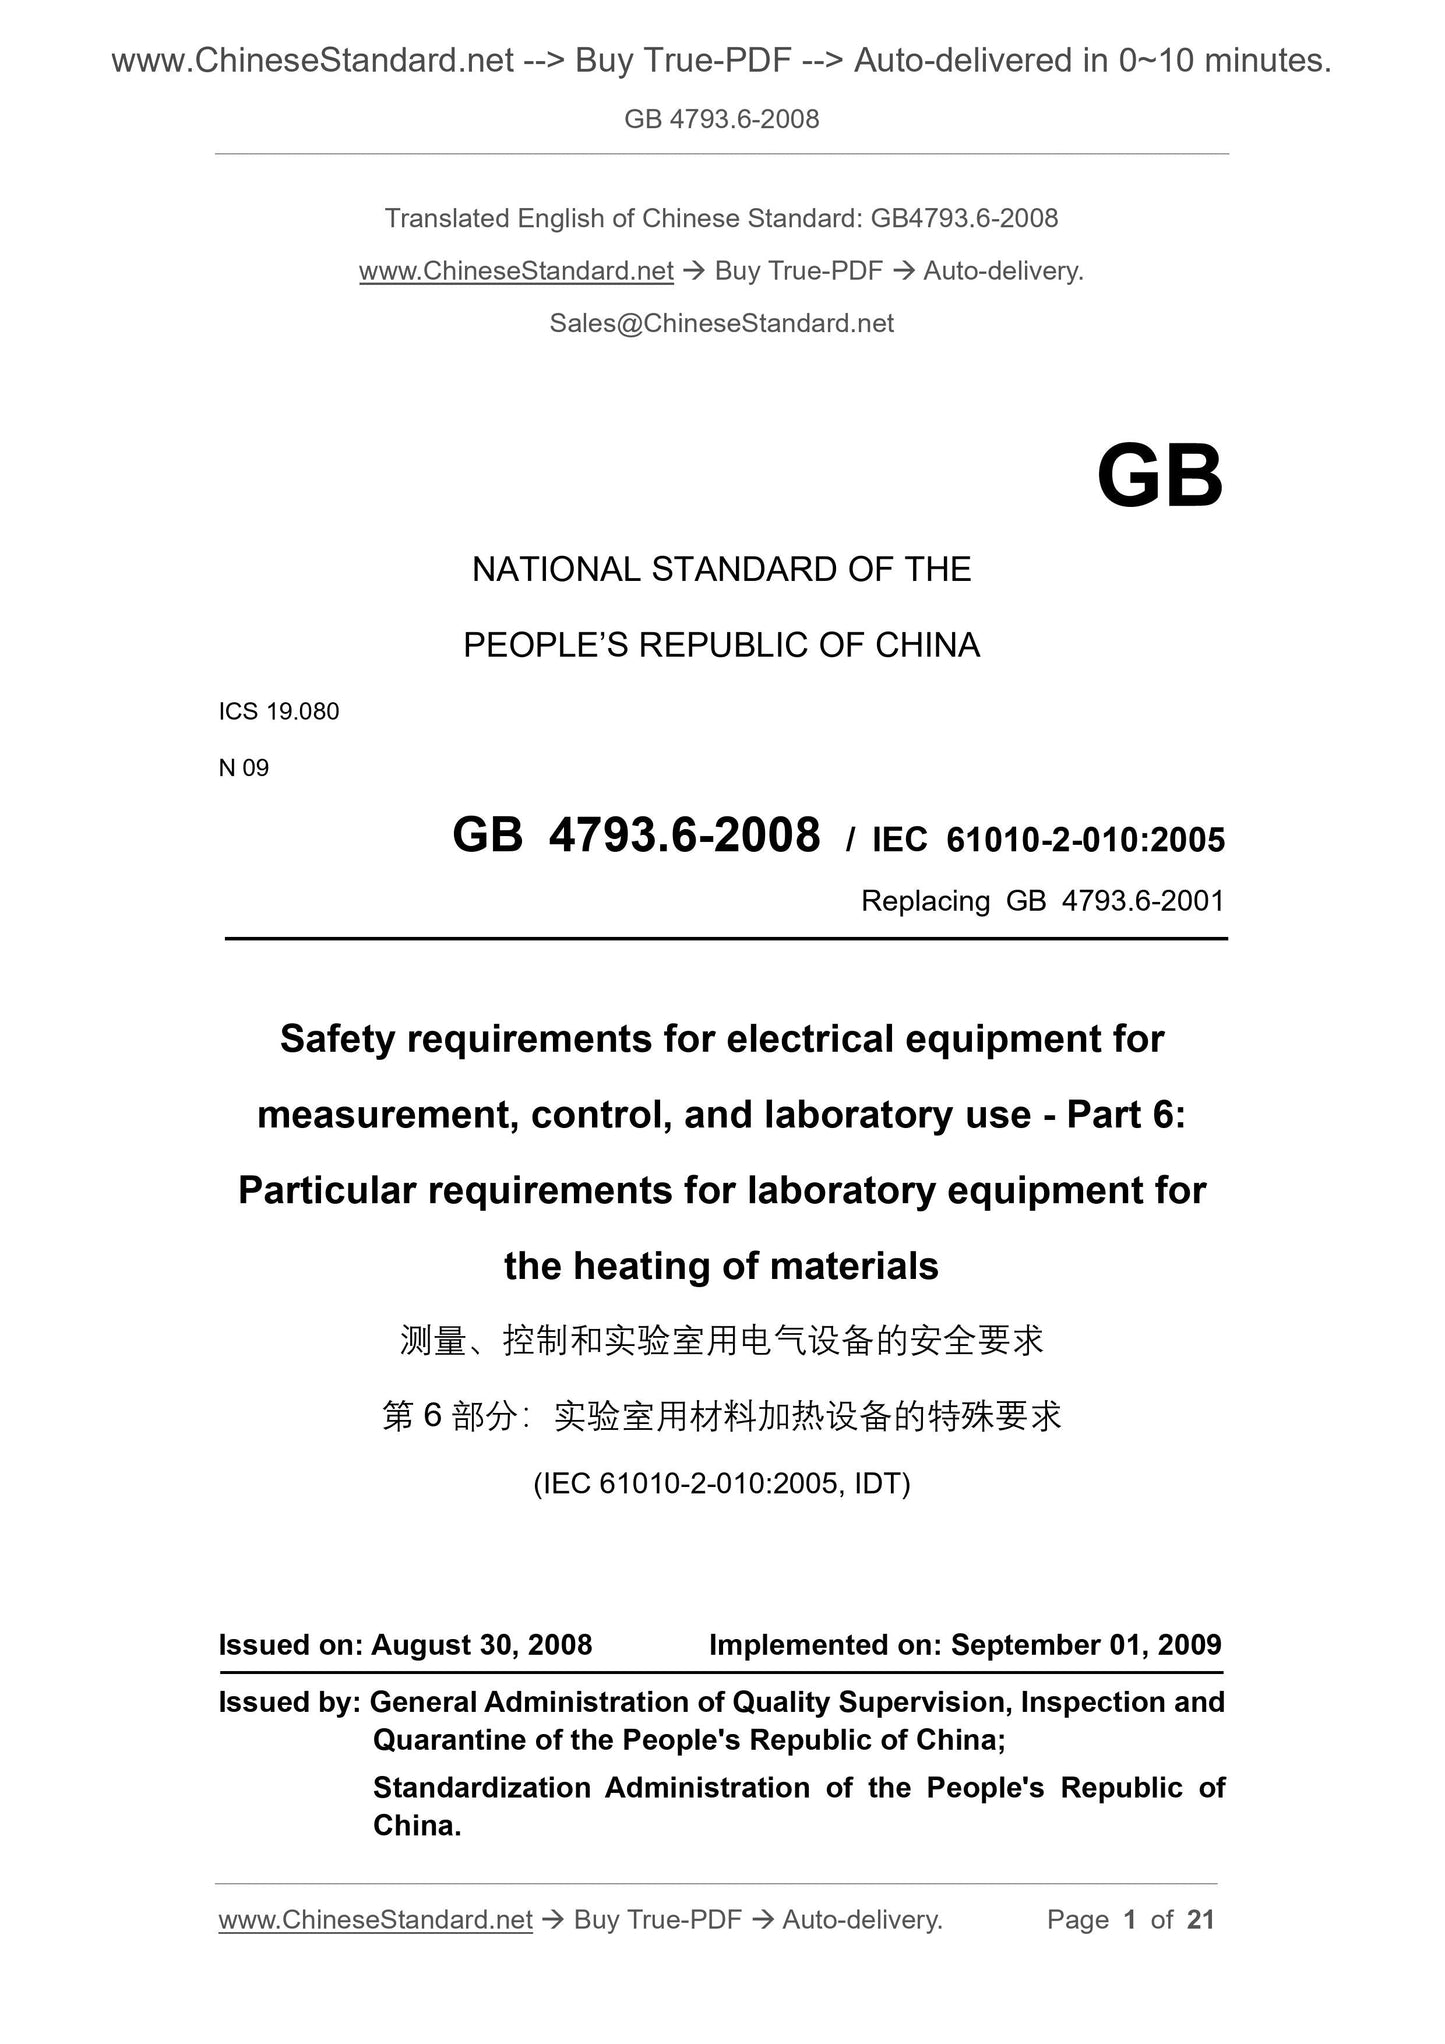 GB 4793.6-2008 Page 1